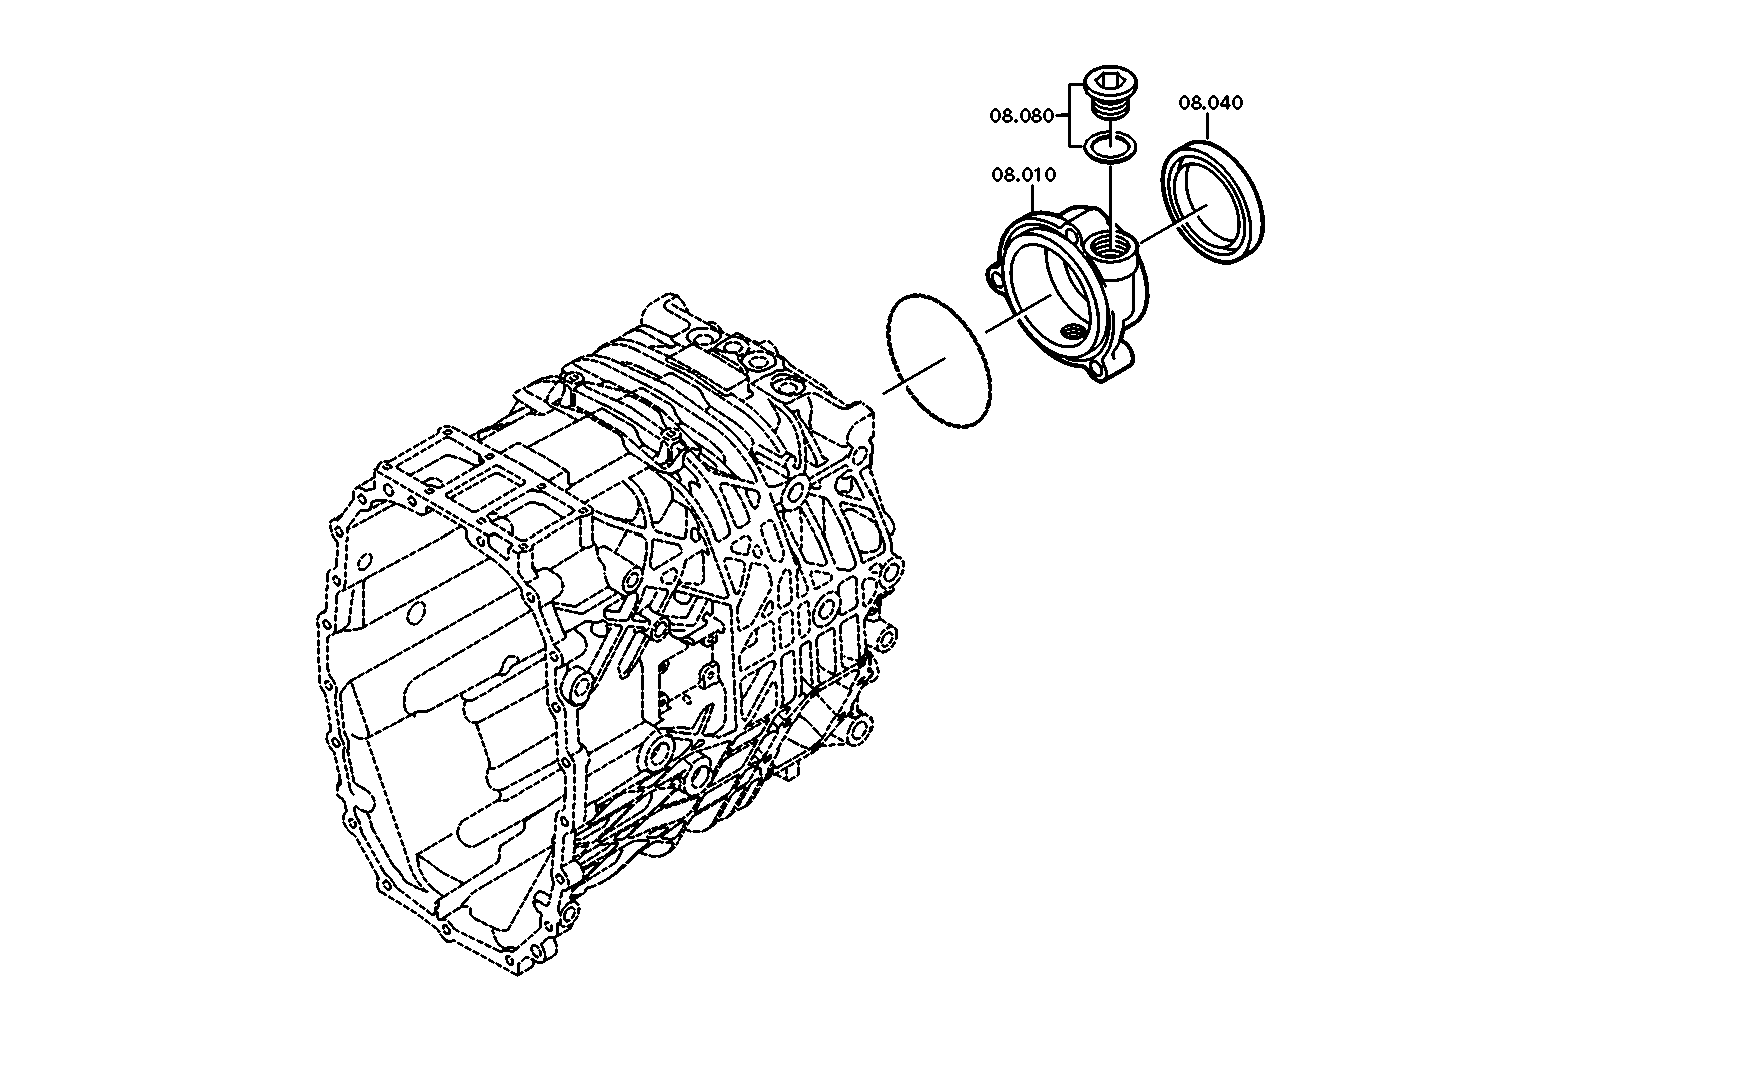 drawing for DAF 1313894 - SPEEDOMETER COVER (figure 5)